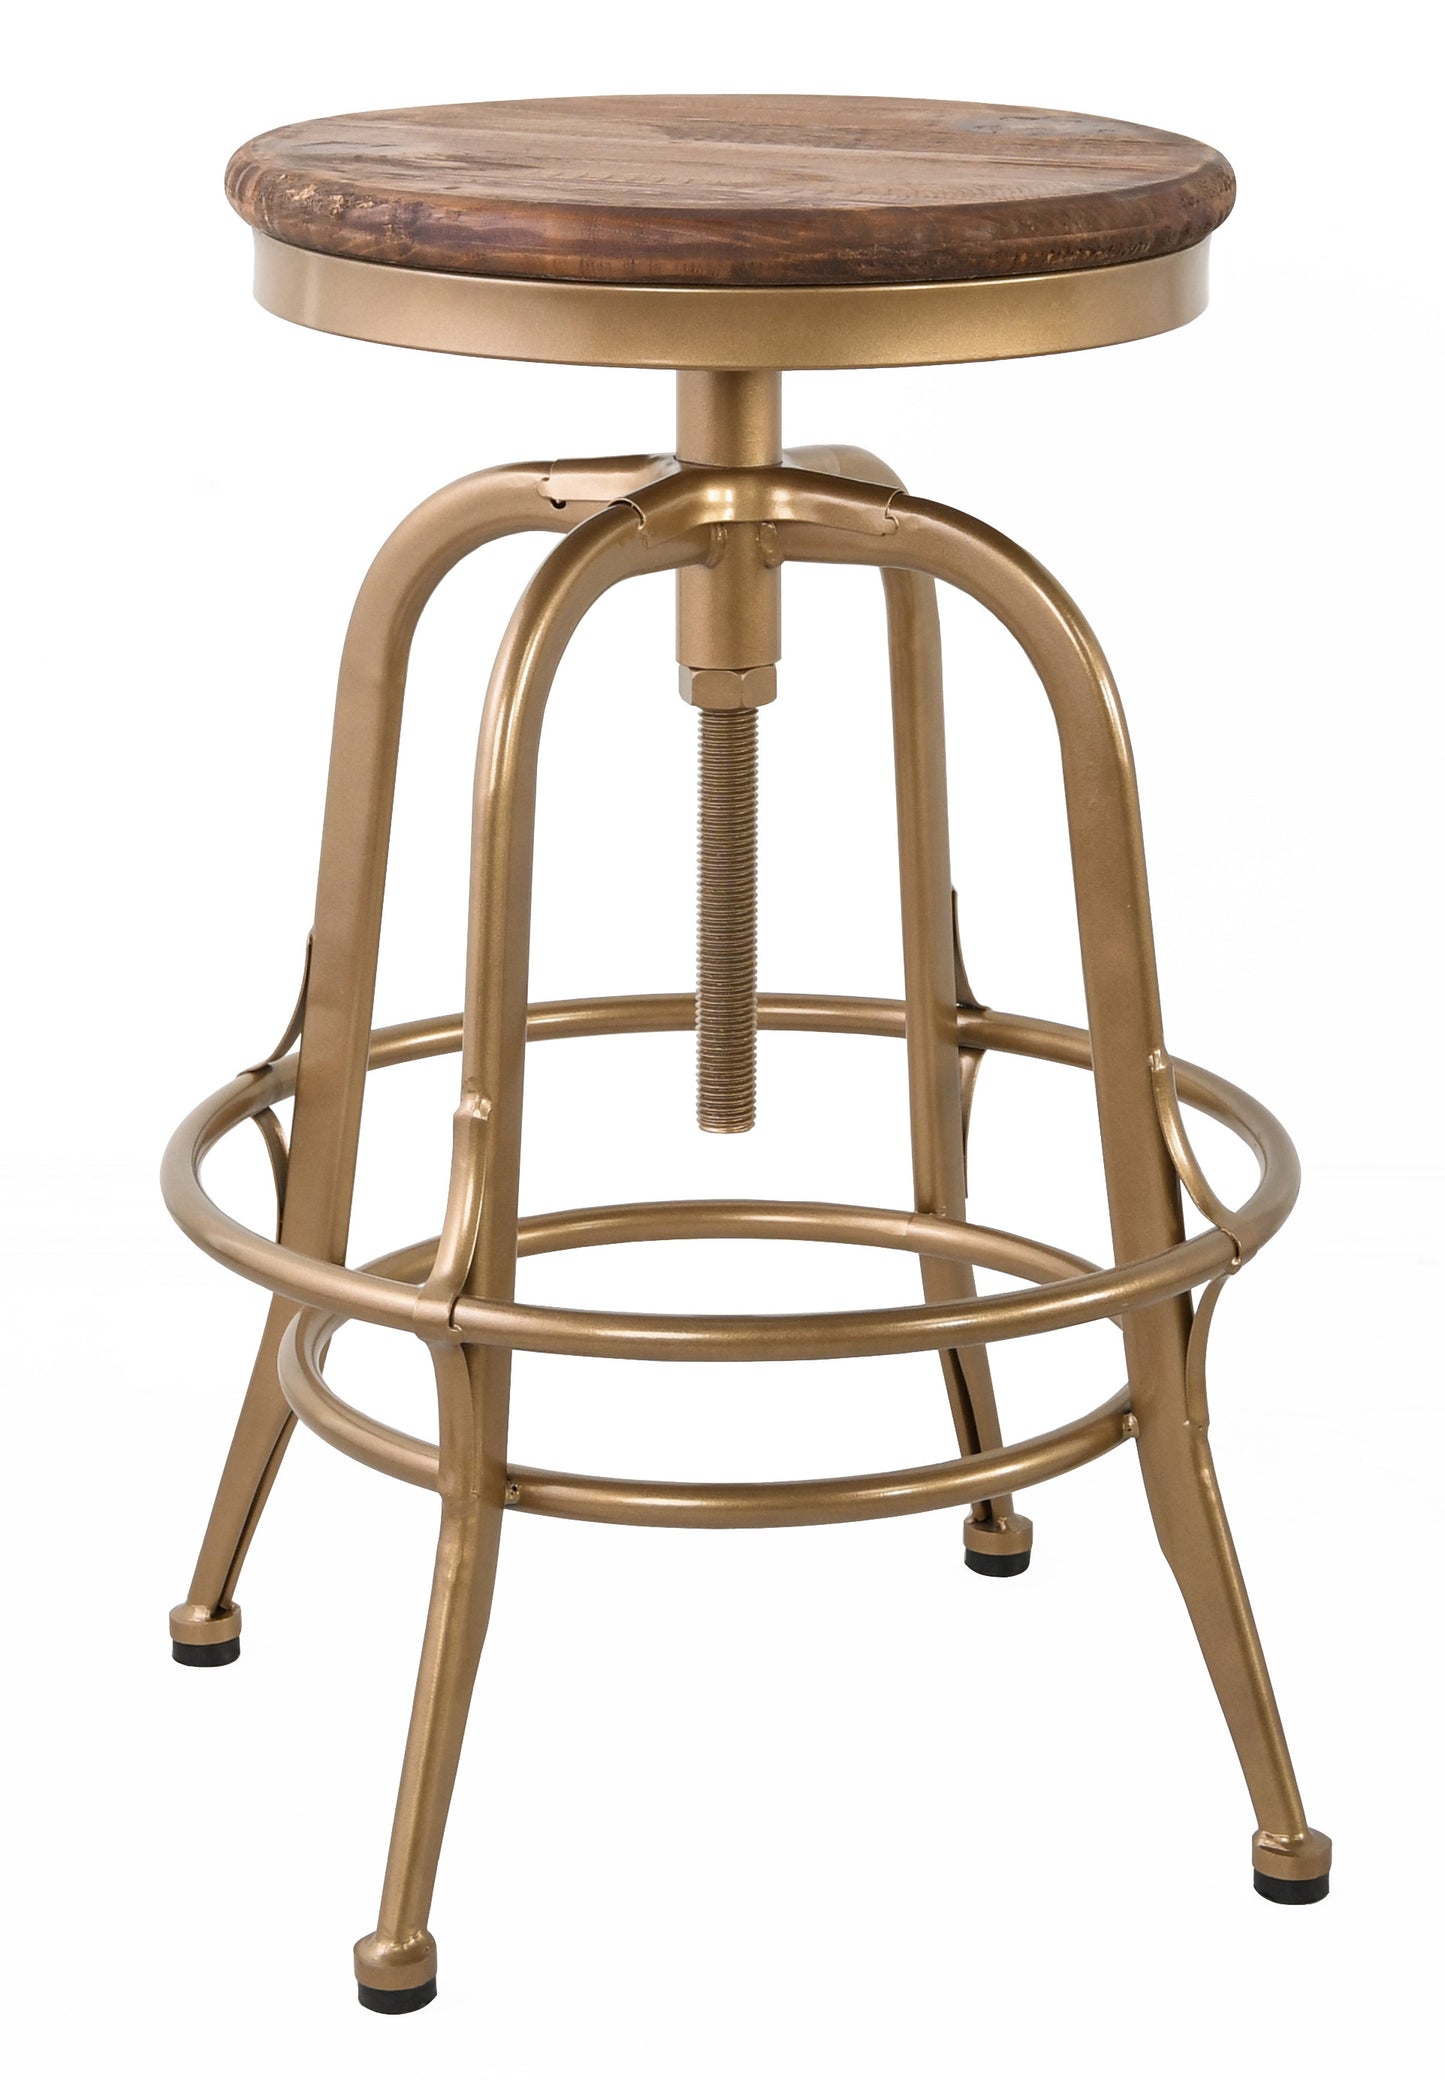 " Brown And Brass Metal Backless Bar Chair